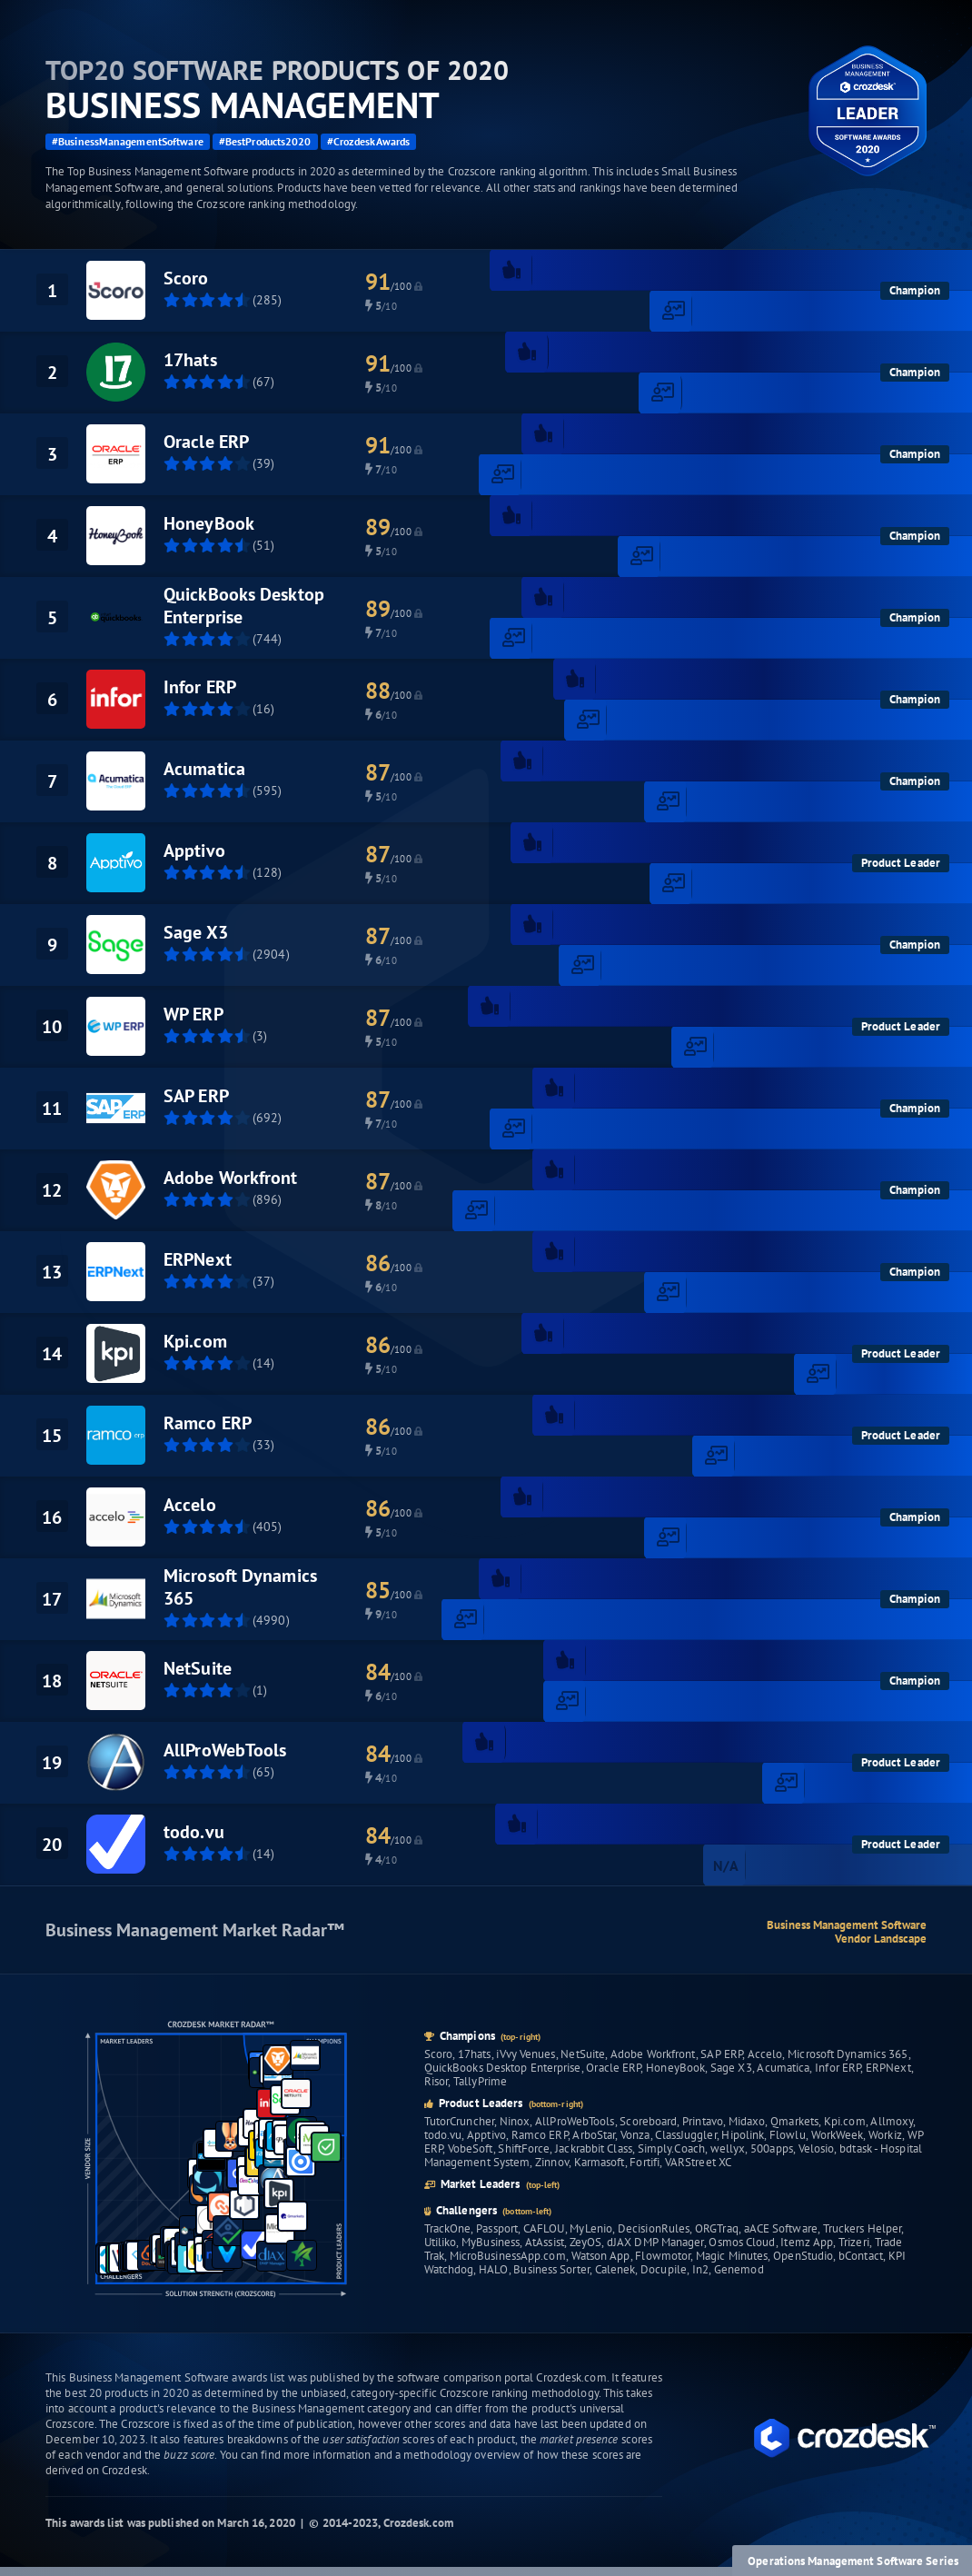 Top 20 Business Management Software of 2020 Infographic